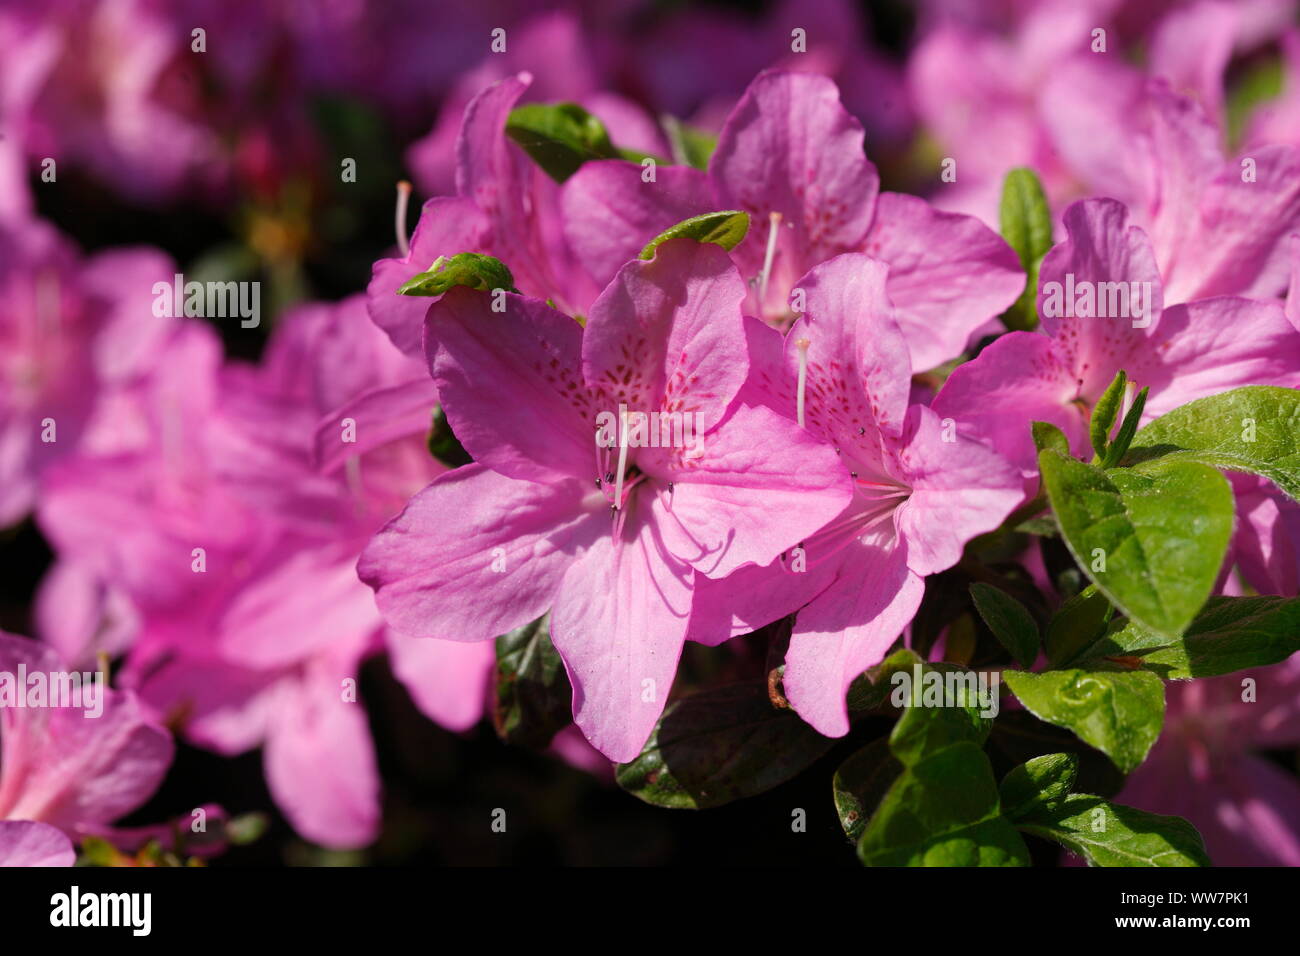 Pink Rhododendron blossom, Bremen, Germany, Europe Stock Photo